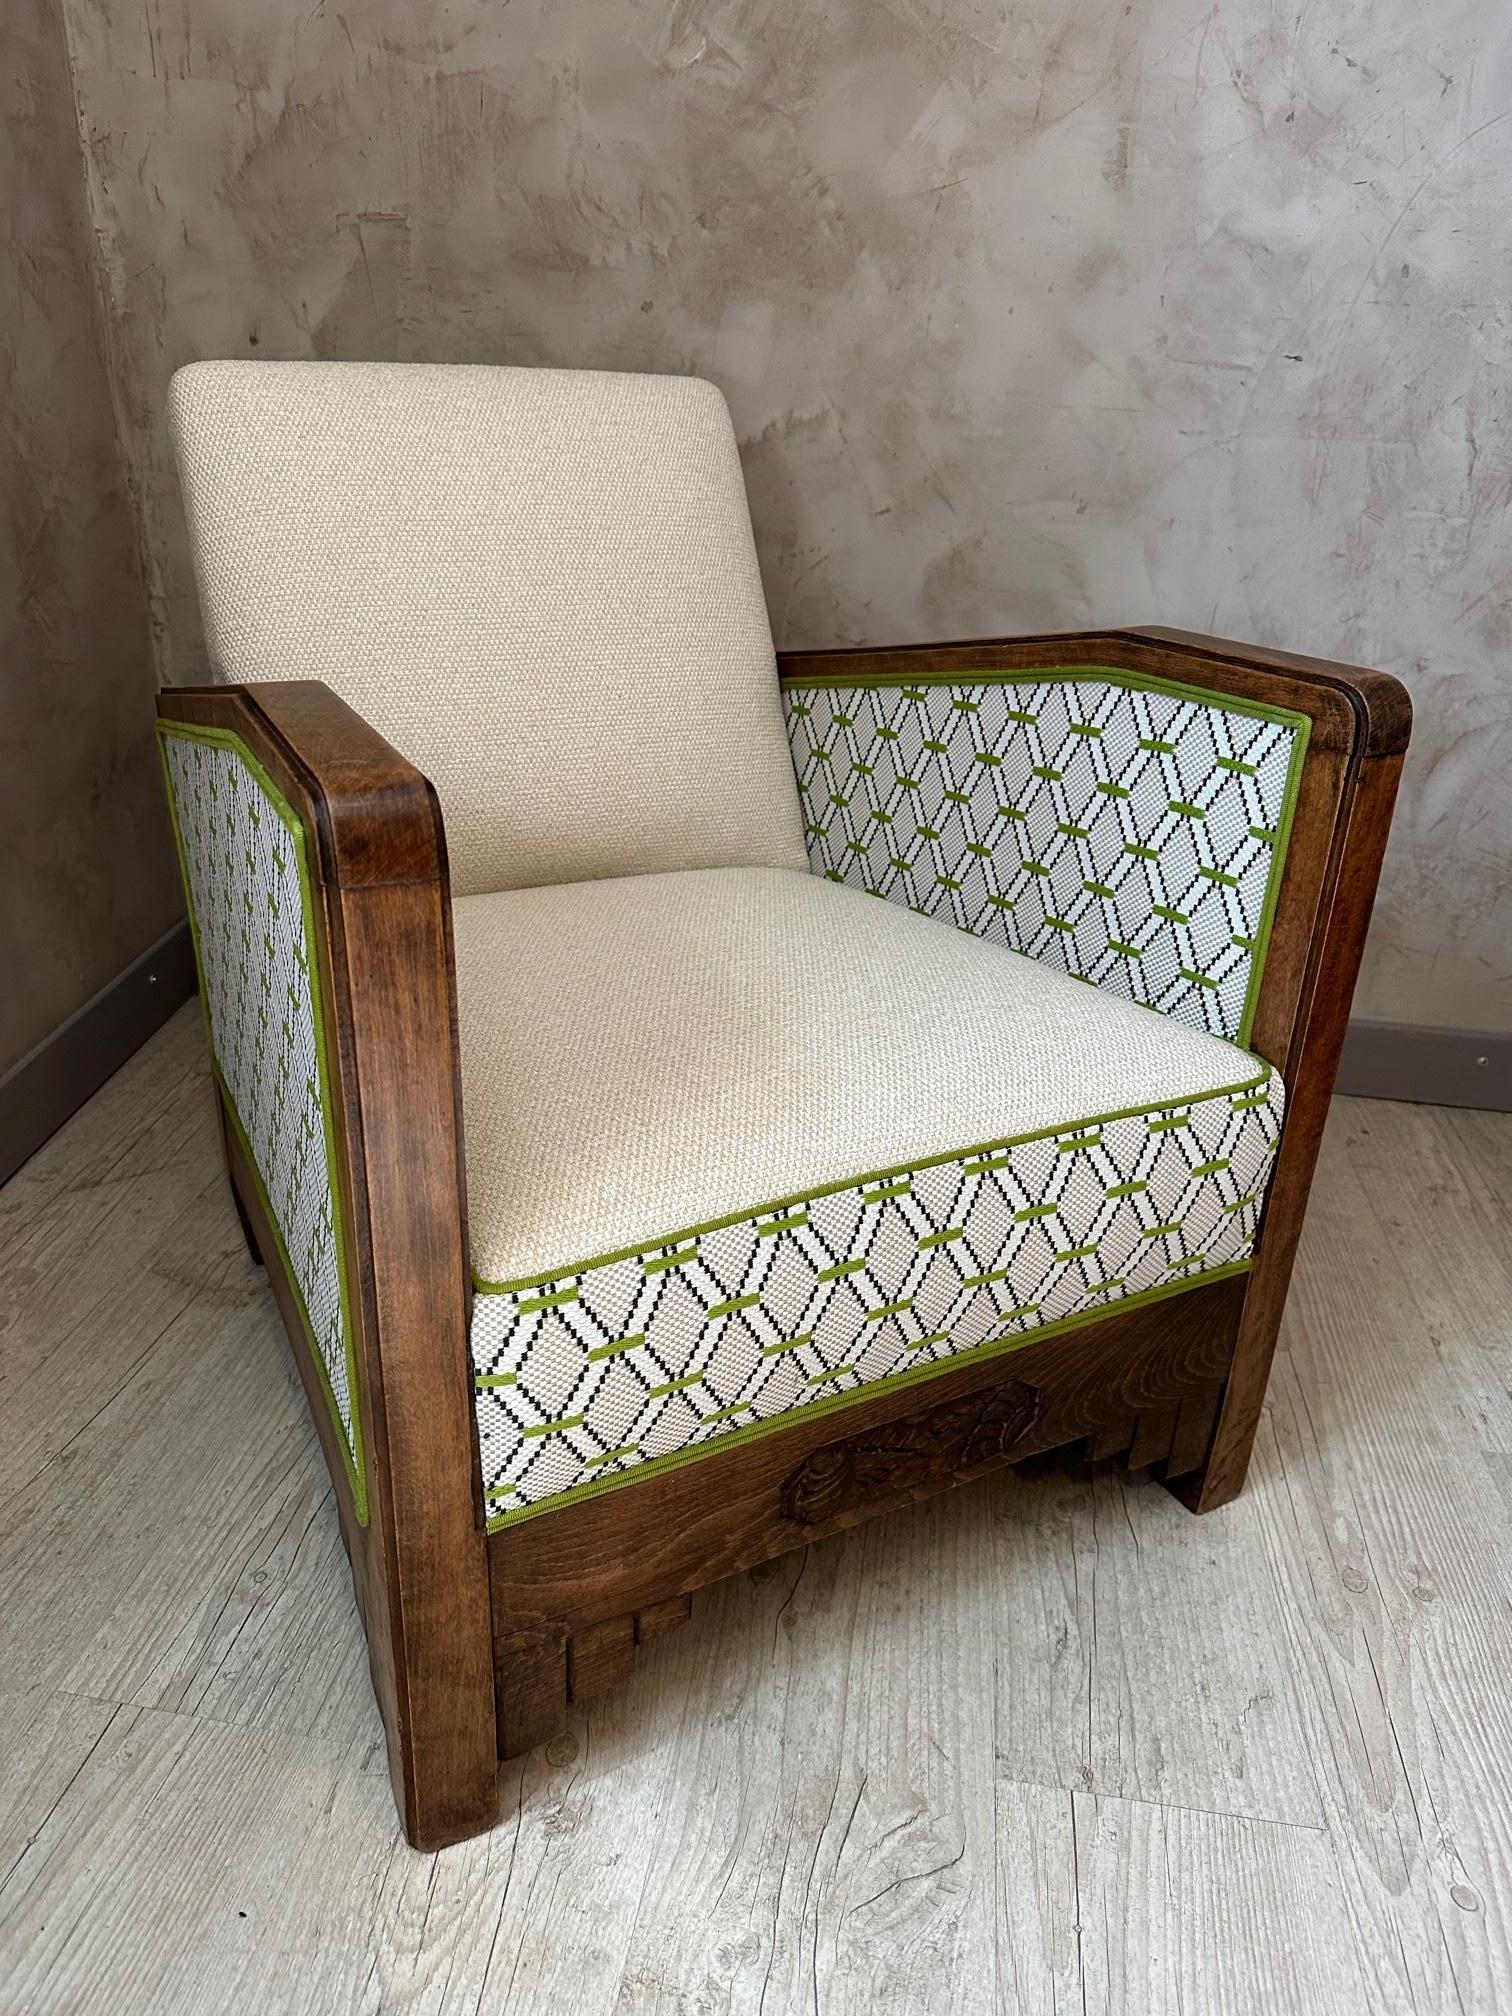 Very nice club-style Art Deco armchair which has been completely redone by us (we are upholsterers) with a very nice outdoor fabric from Nobilis. 
We put a beige fabric on the interior backrest and the seat and a beige and green graphic fabric on